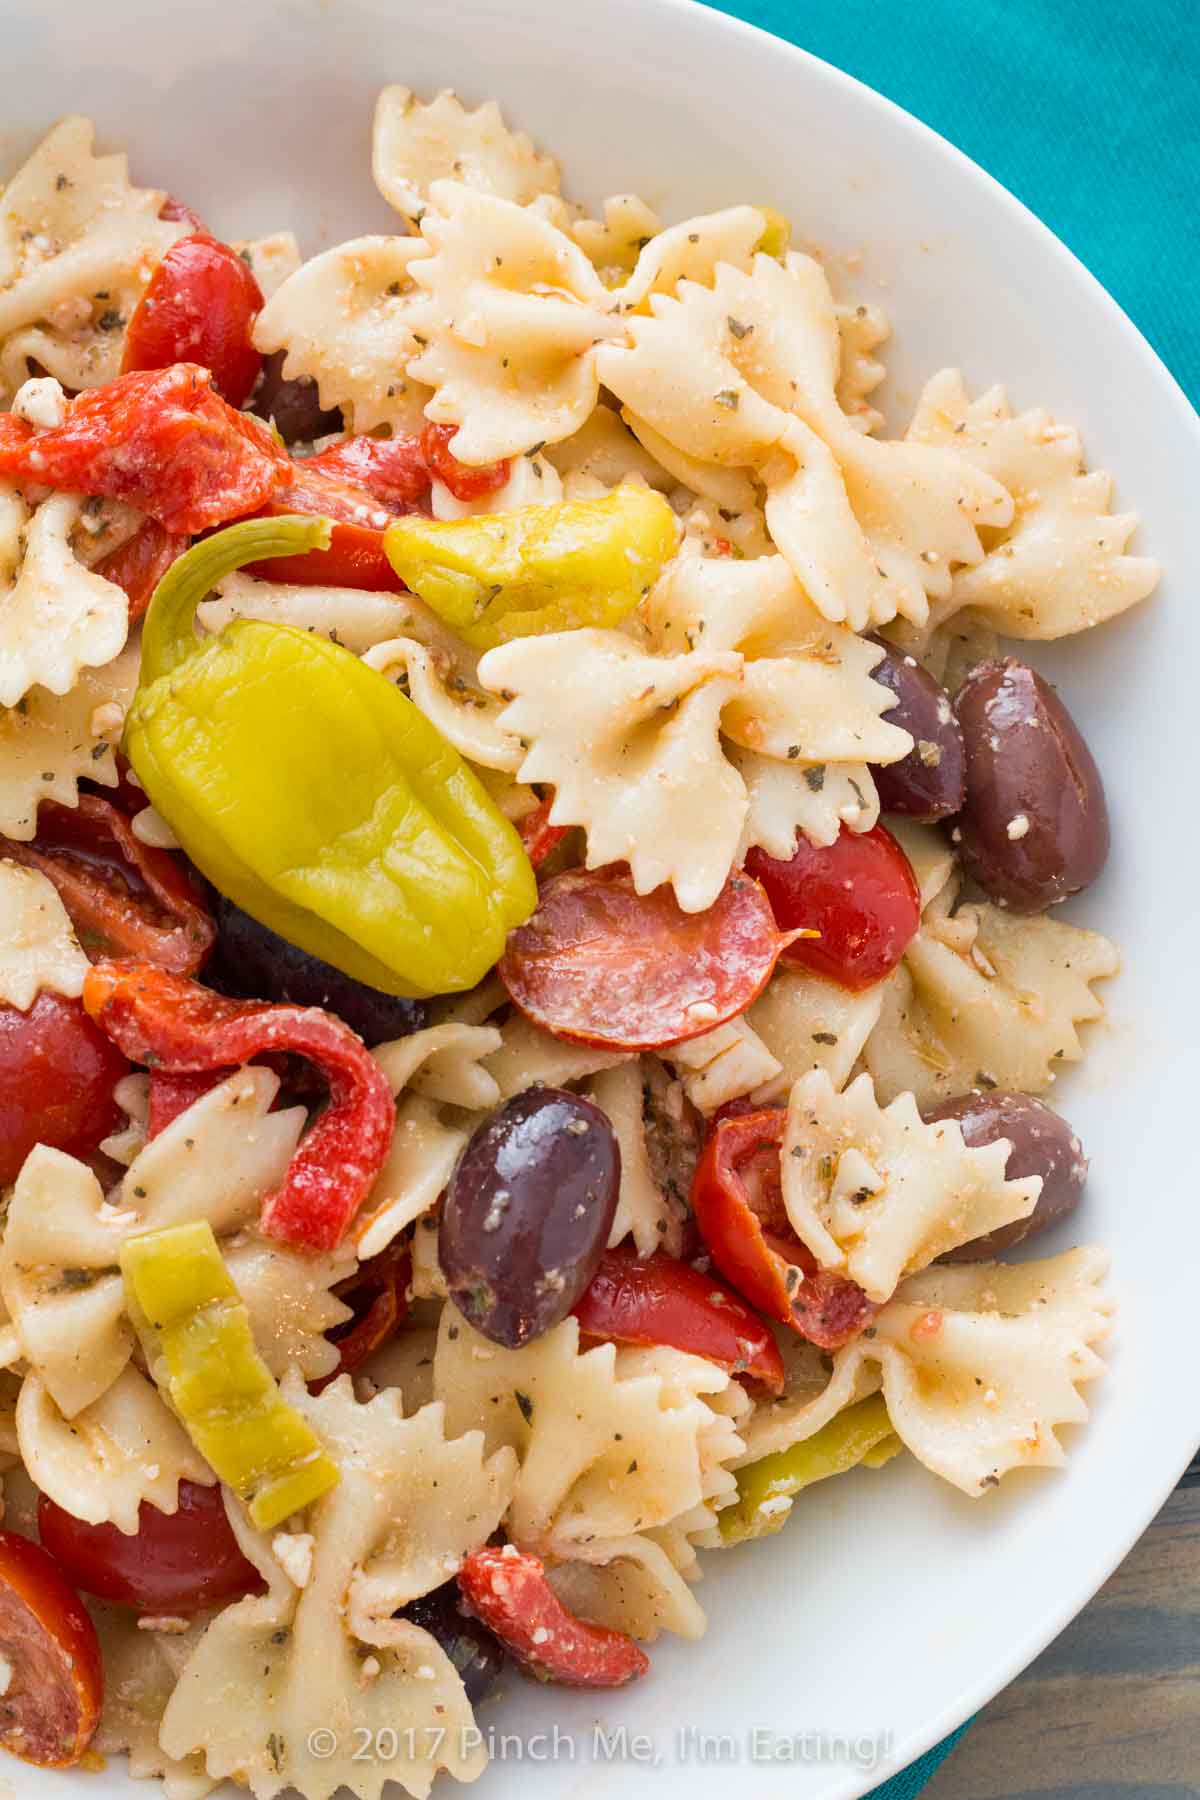 This Greek pasta salad is everything a pasta salad should be: light, flavorful, and full of ingredients you'll love! Perfect for a potluck, picnic, or party!